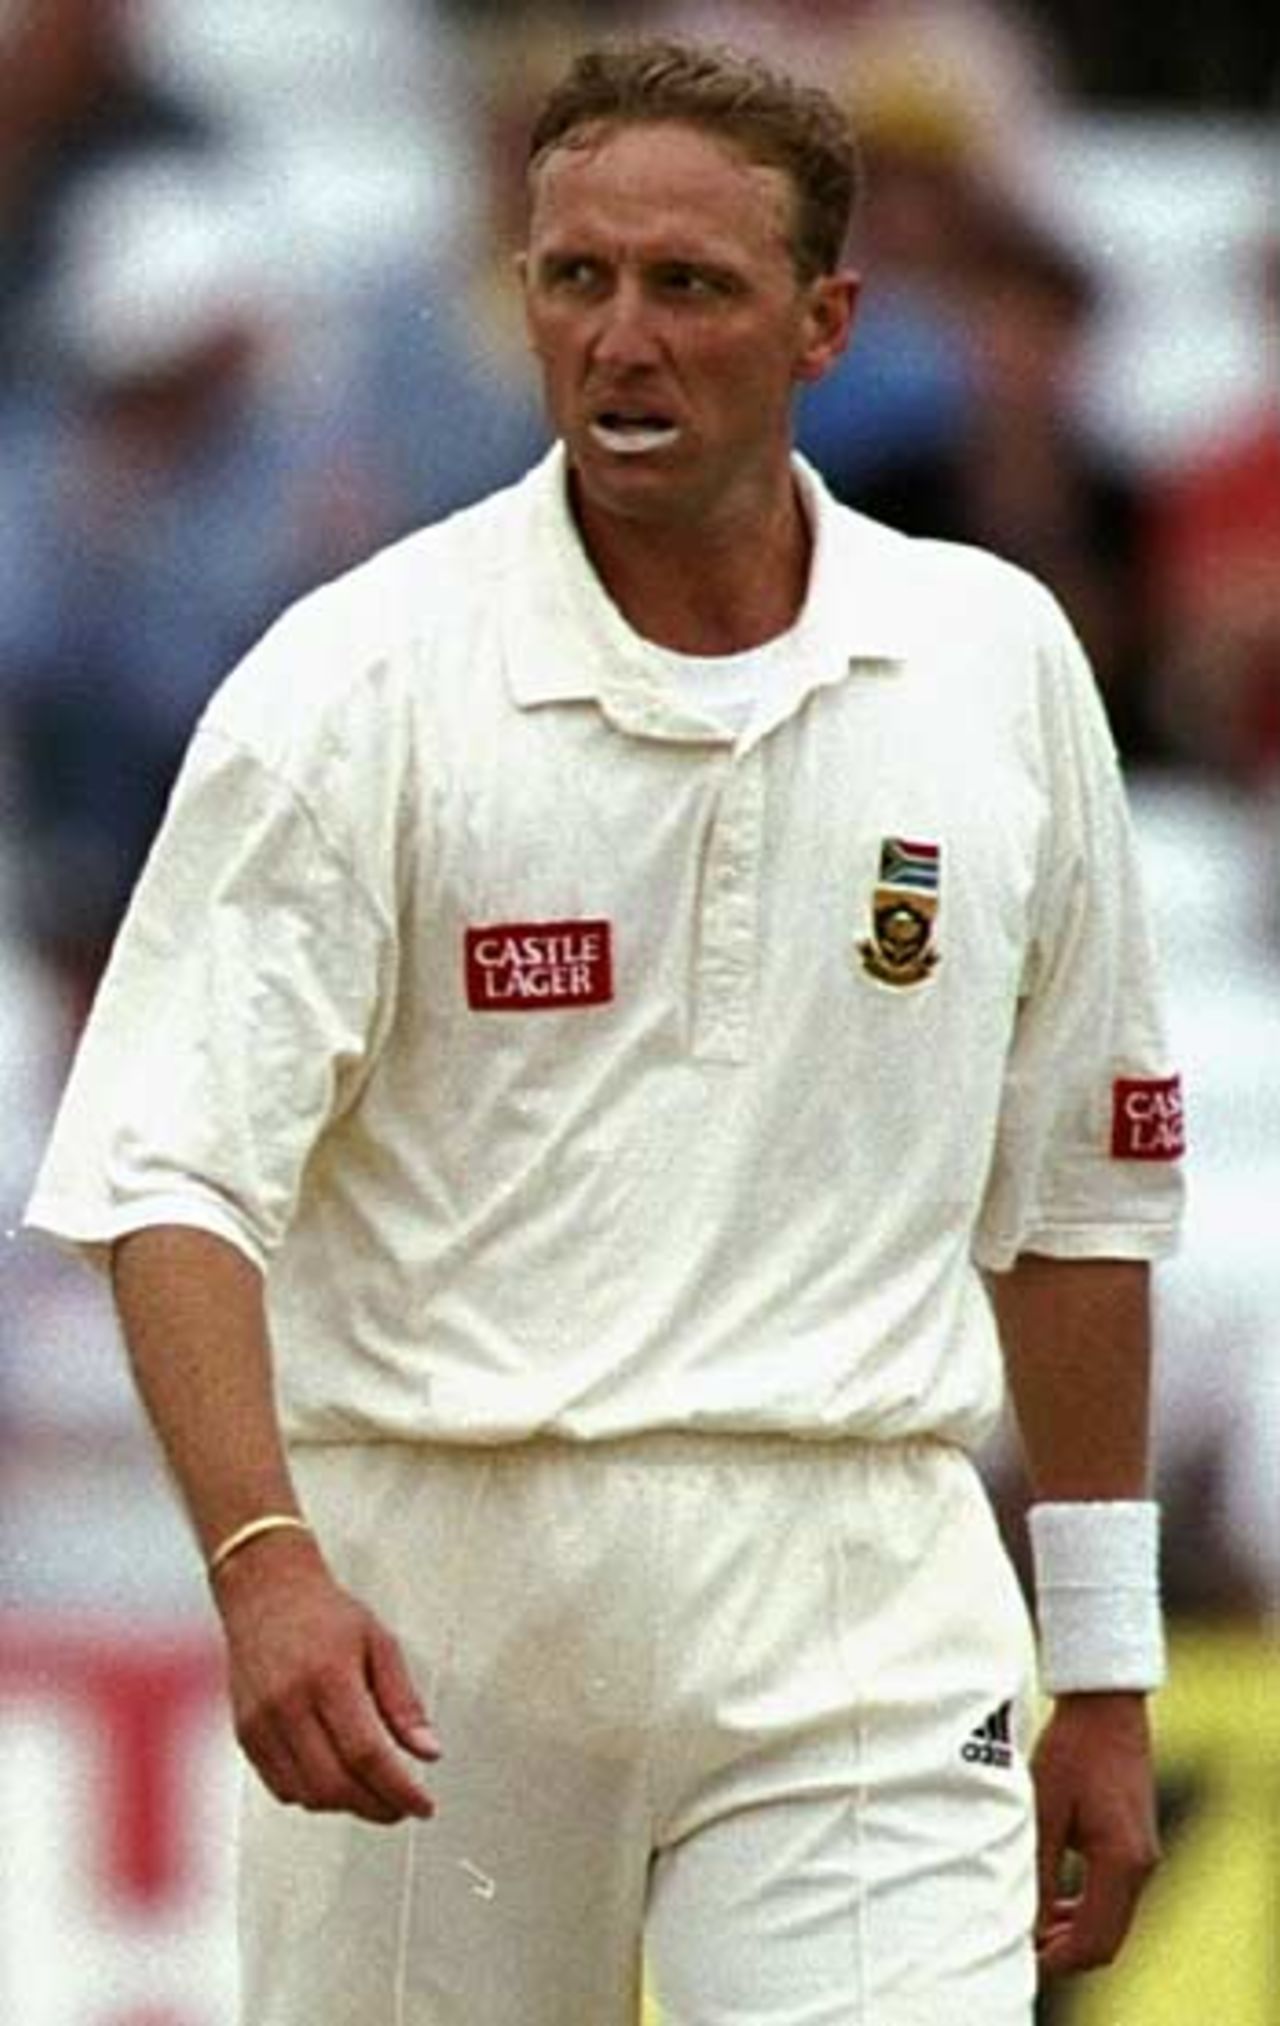 If looks could kill ... Allan Donald gives Michael Atherton the stare, England v South Africa, 4th Test, Trent Bridge, July 26, 1998